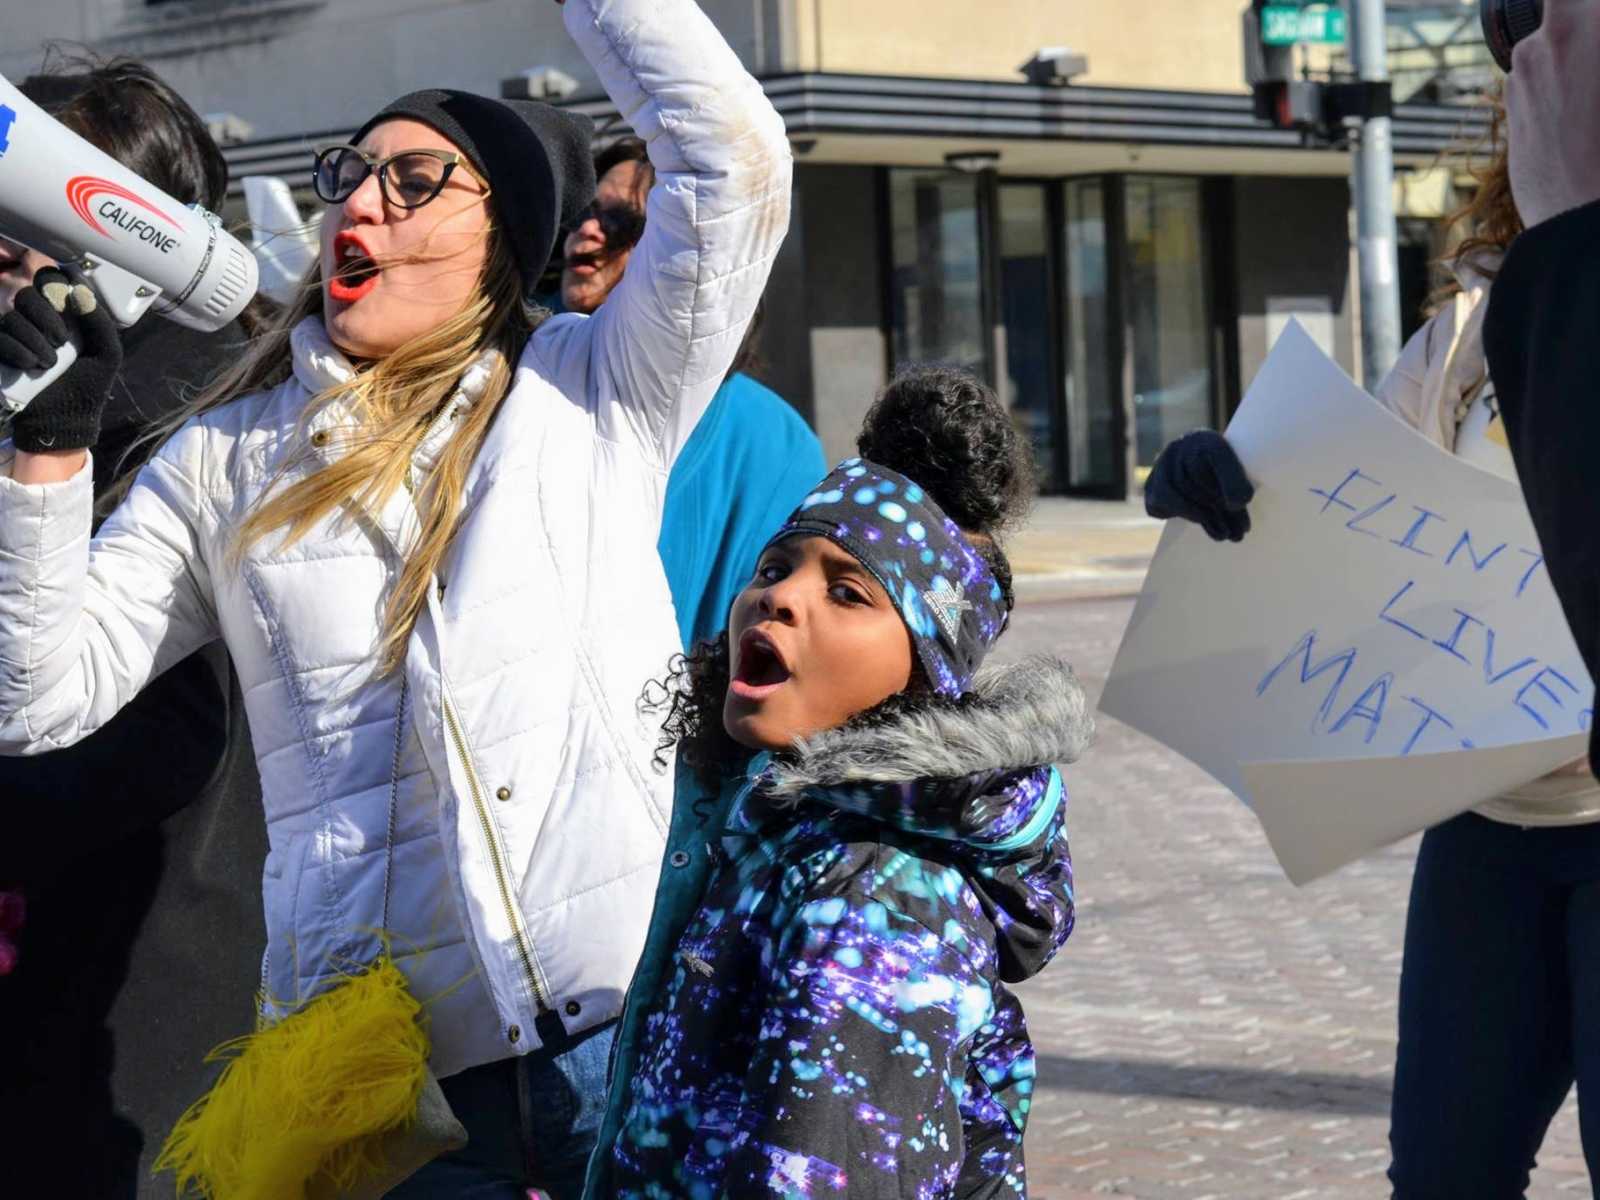 Little girl and mother protesting the Flint water crisis and sign in background saying, "Flint Lives Matter"